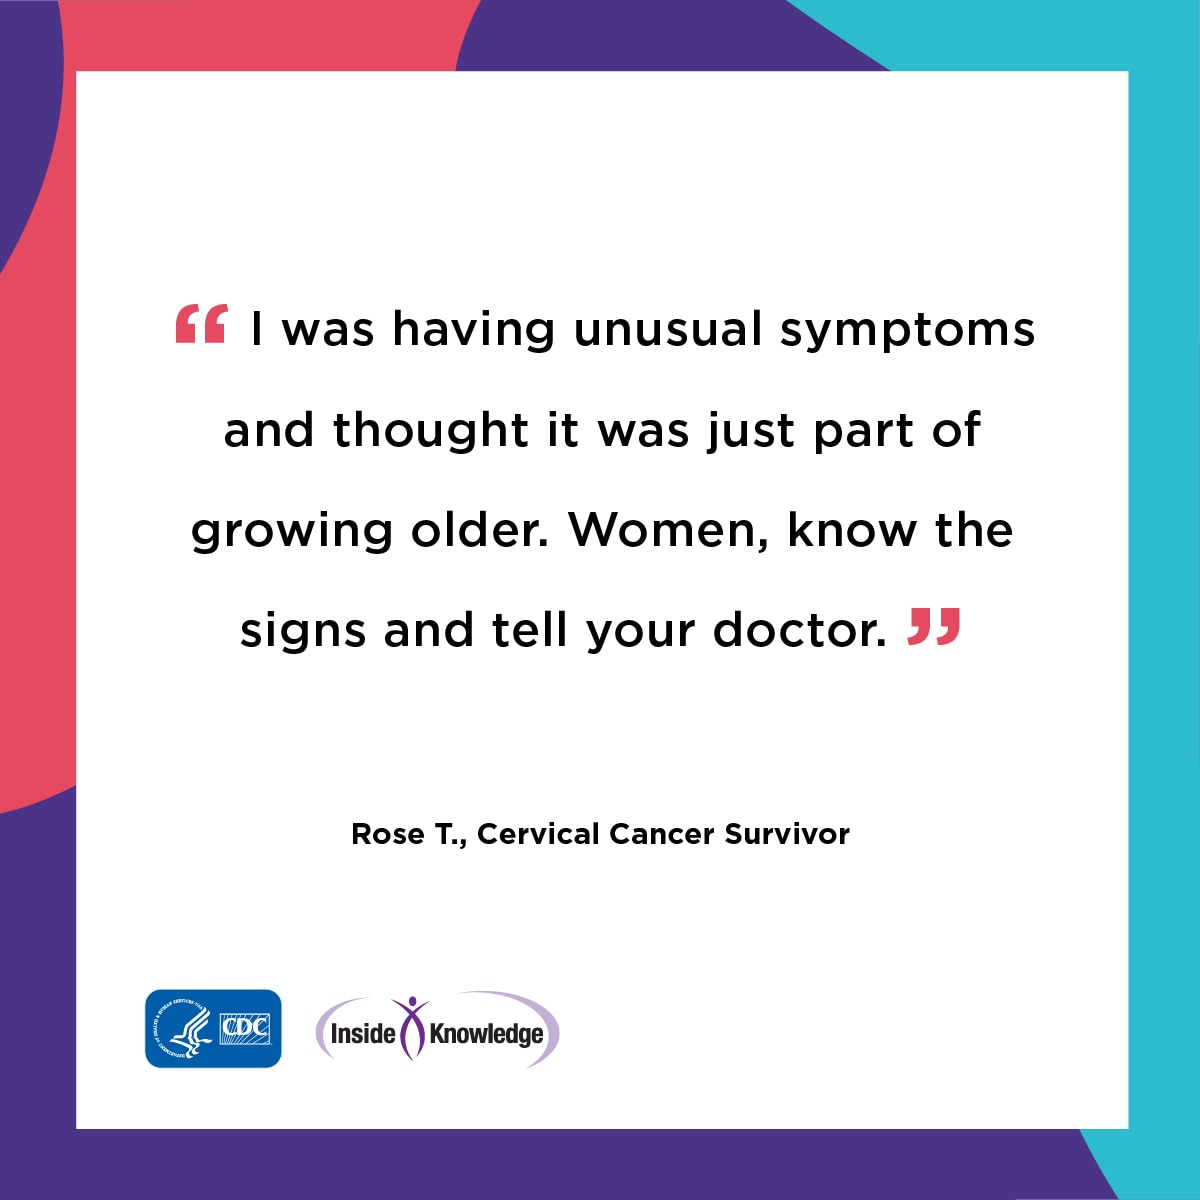 I was having unusual symptoms and thought it was just part of growing older. Women, know the signs and tell your doctor. Rose T., Cervical Cancer Survivor